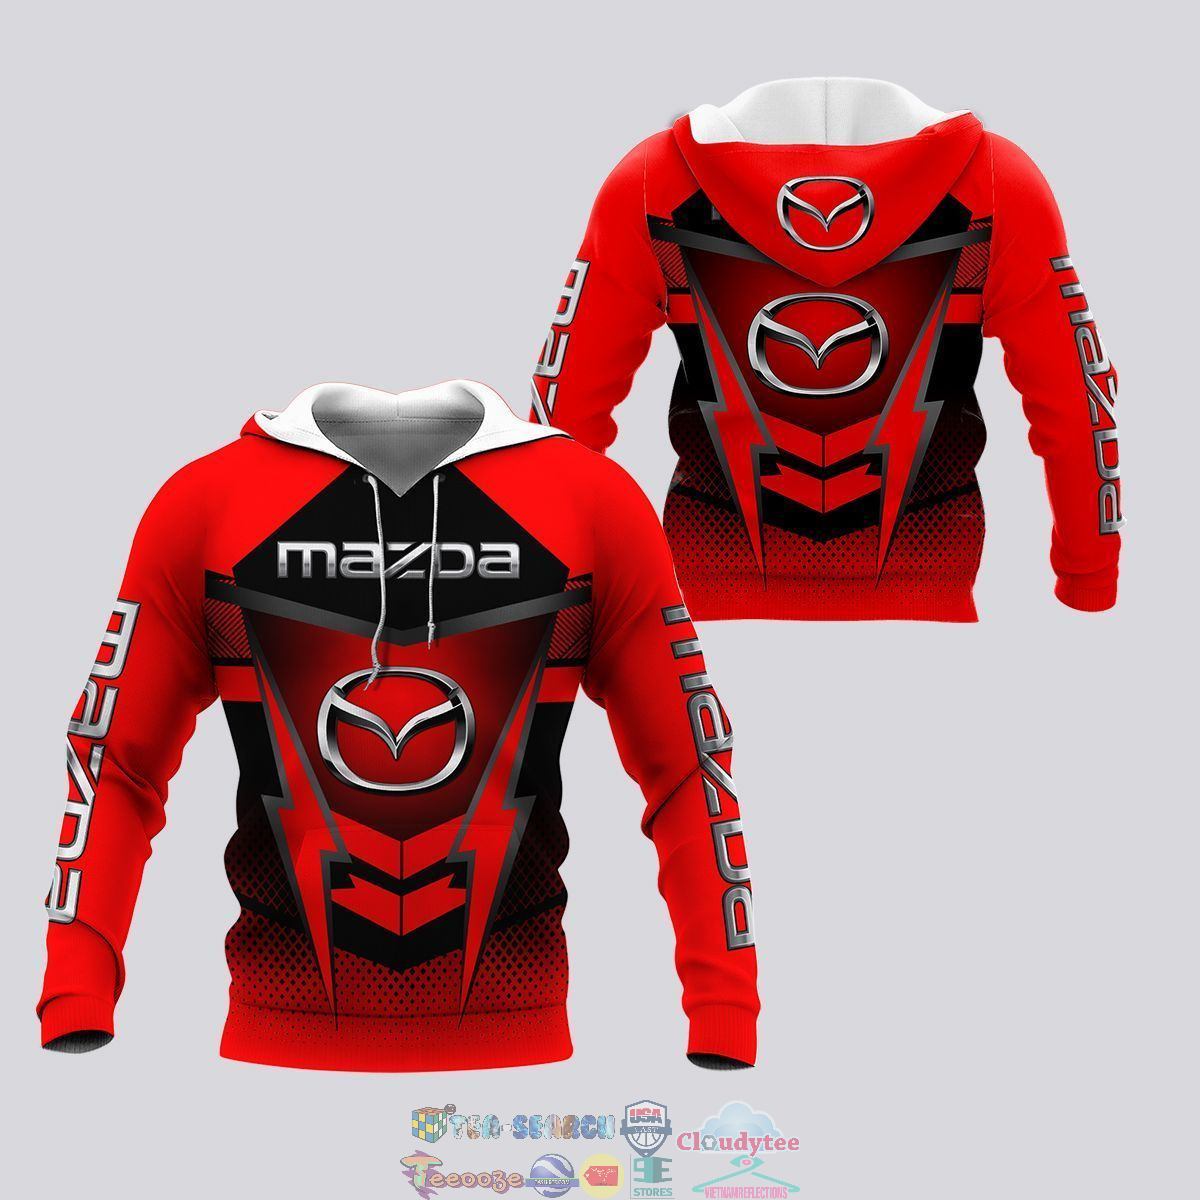 Mazda ver 7 3D hoodie and t-shirt